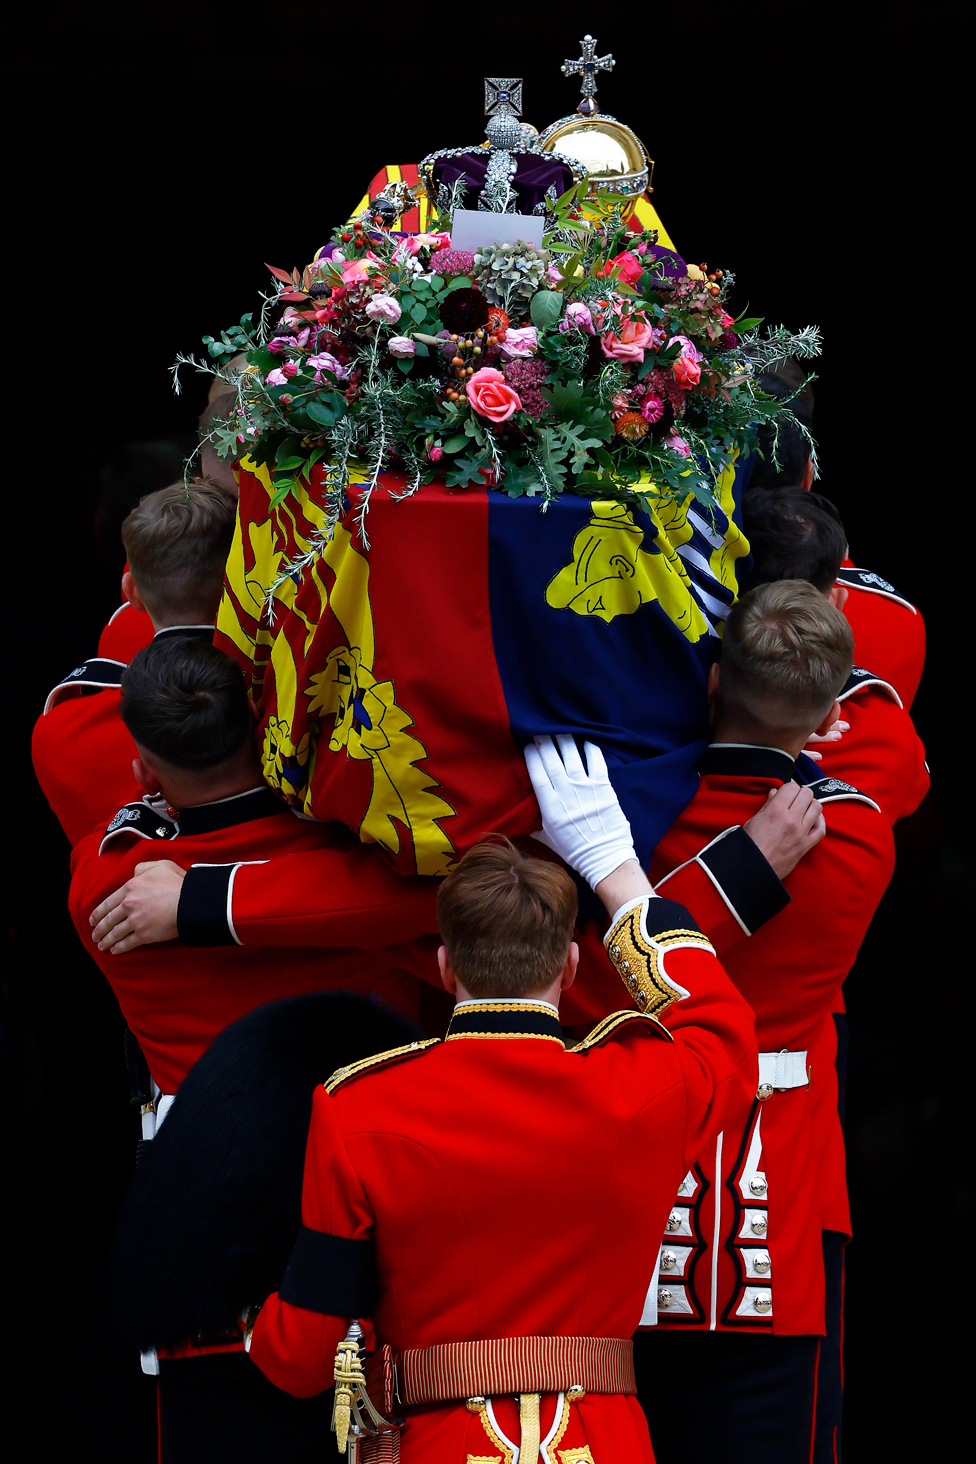 Pall bearers carry the coffin of Queen Elizabeth II, with the Imperial State Crown resting on top, into St. George's Chapel, Windsor - on 19 September 19, 2022.